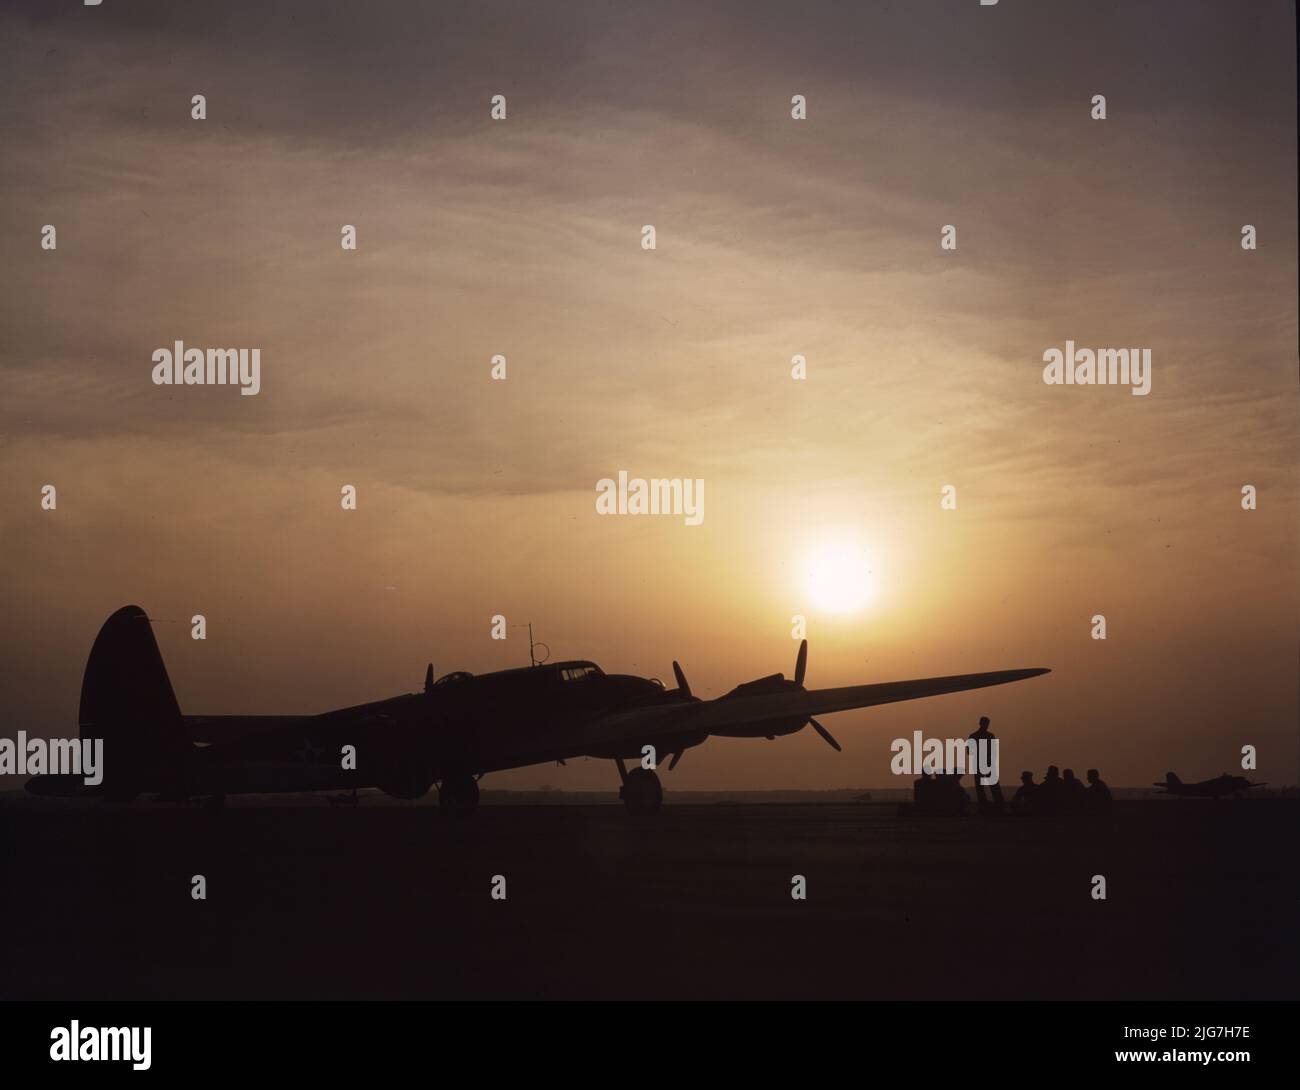 Sunset silhouette of flying fortress, Langley Field, Va. Photograph shows a B-17 bomber. Stock Photo